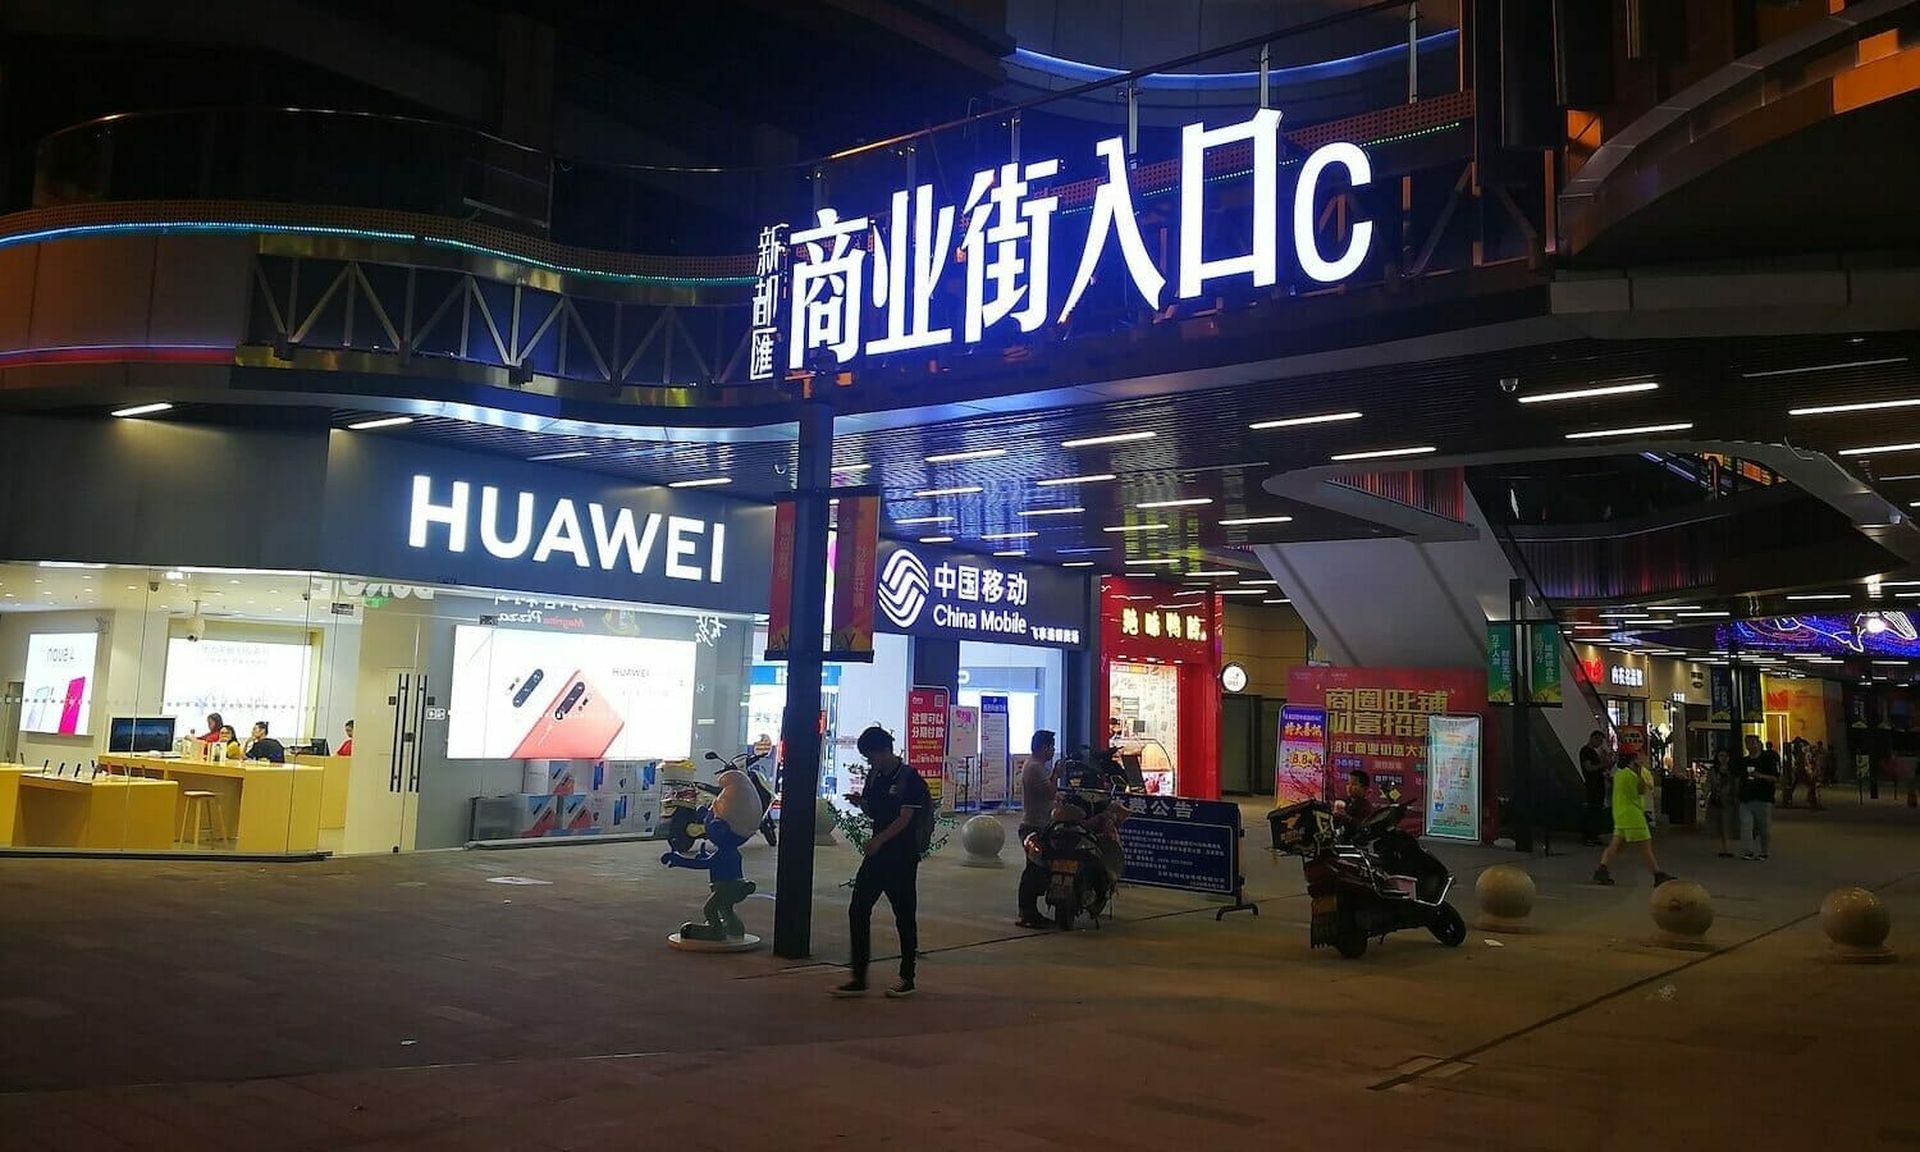 A U.K. auditing agency found that Huawei coding fell short of acceptable standards,  and that the company has yet to address several of the security issues identified in last year’s report. (Rowingbohe via Creative Commons Attribution-Share Alike 4.0 International license)